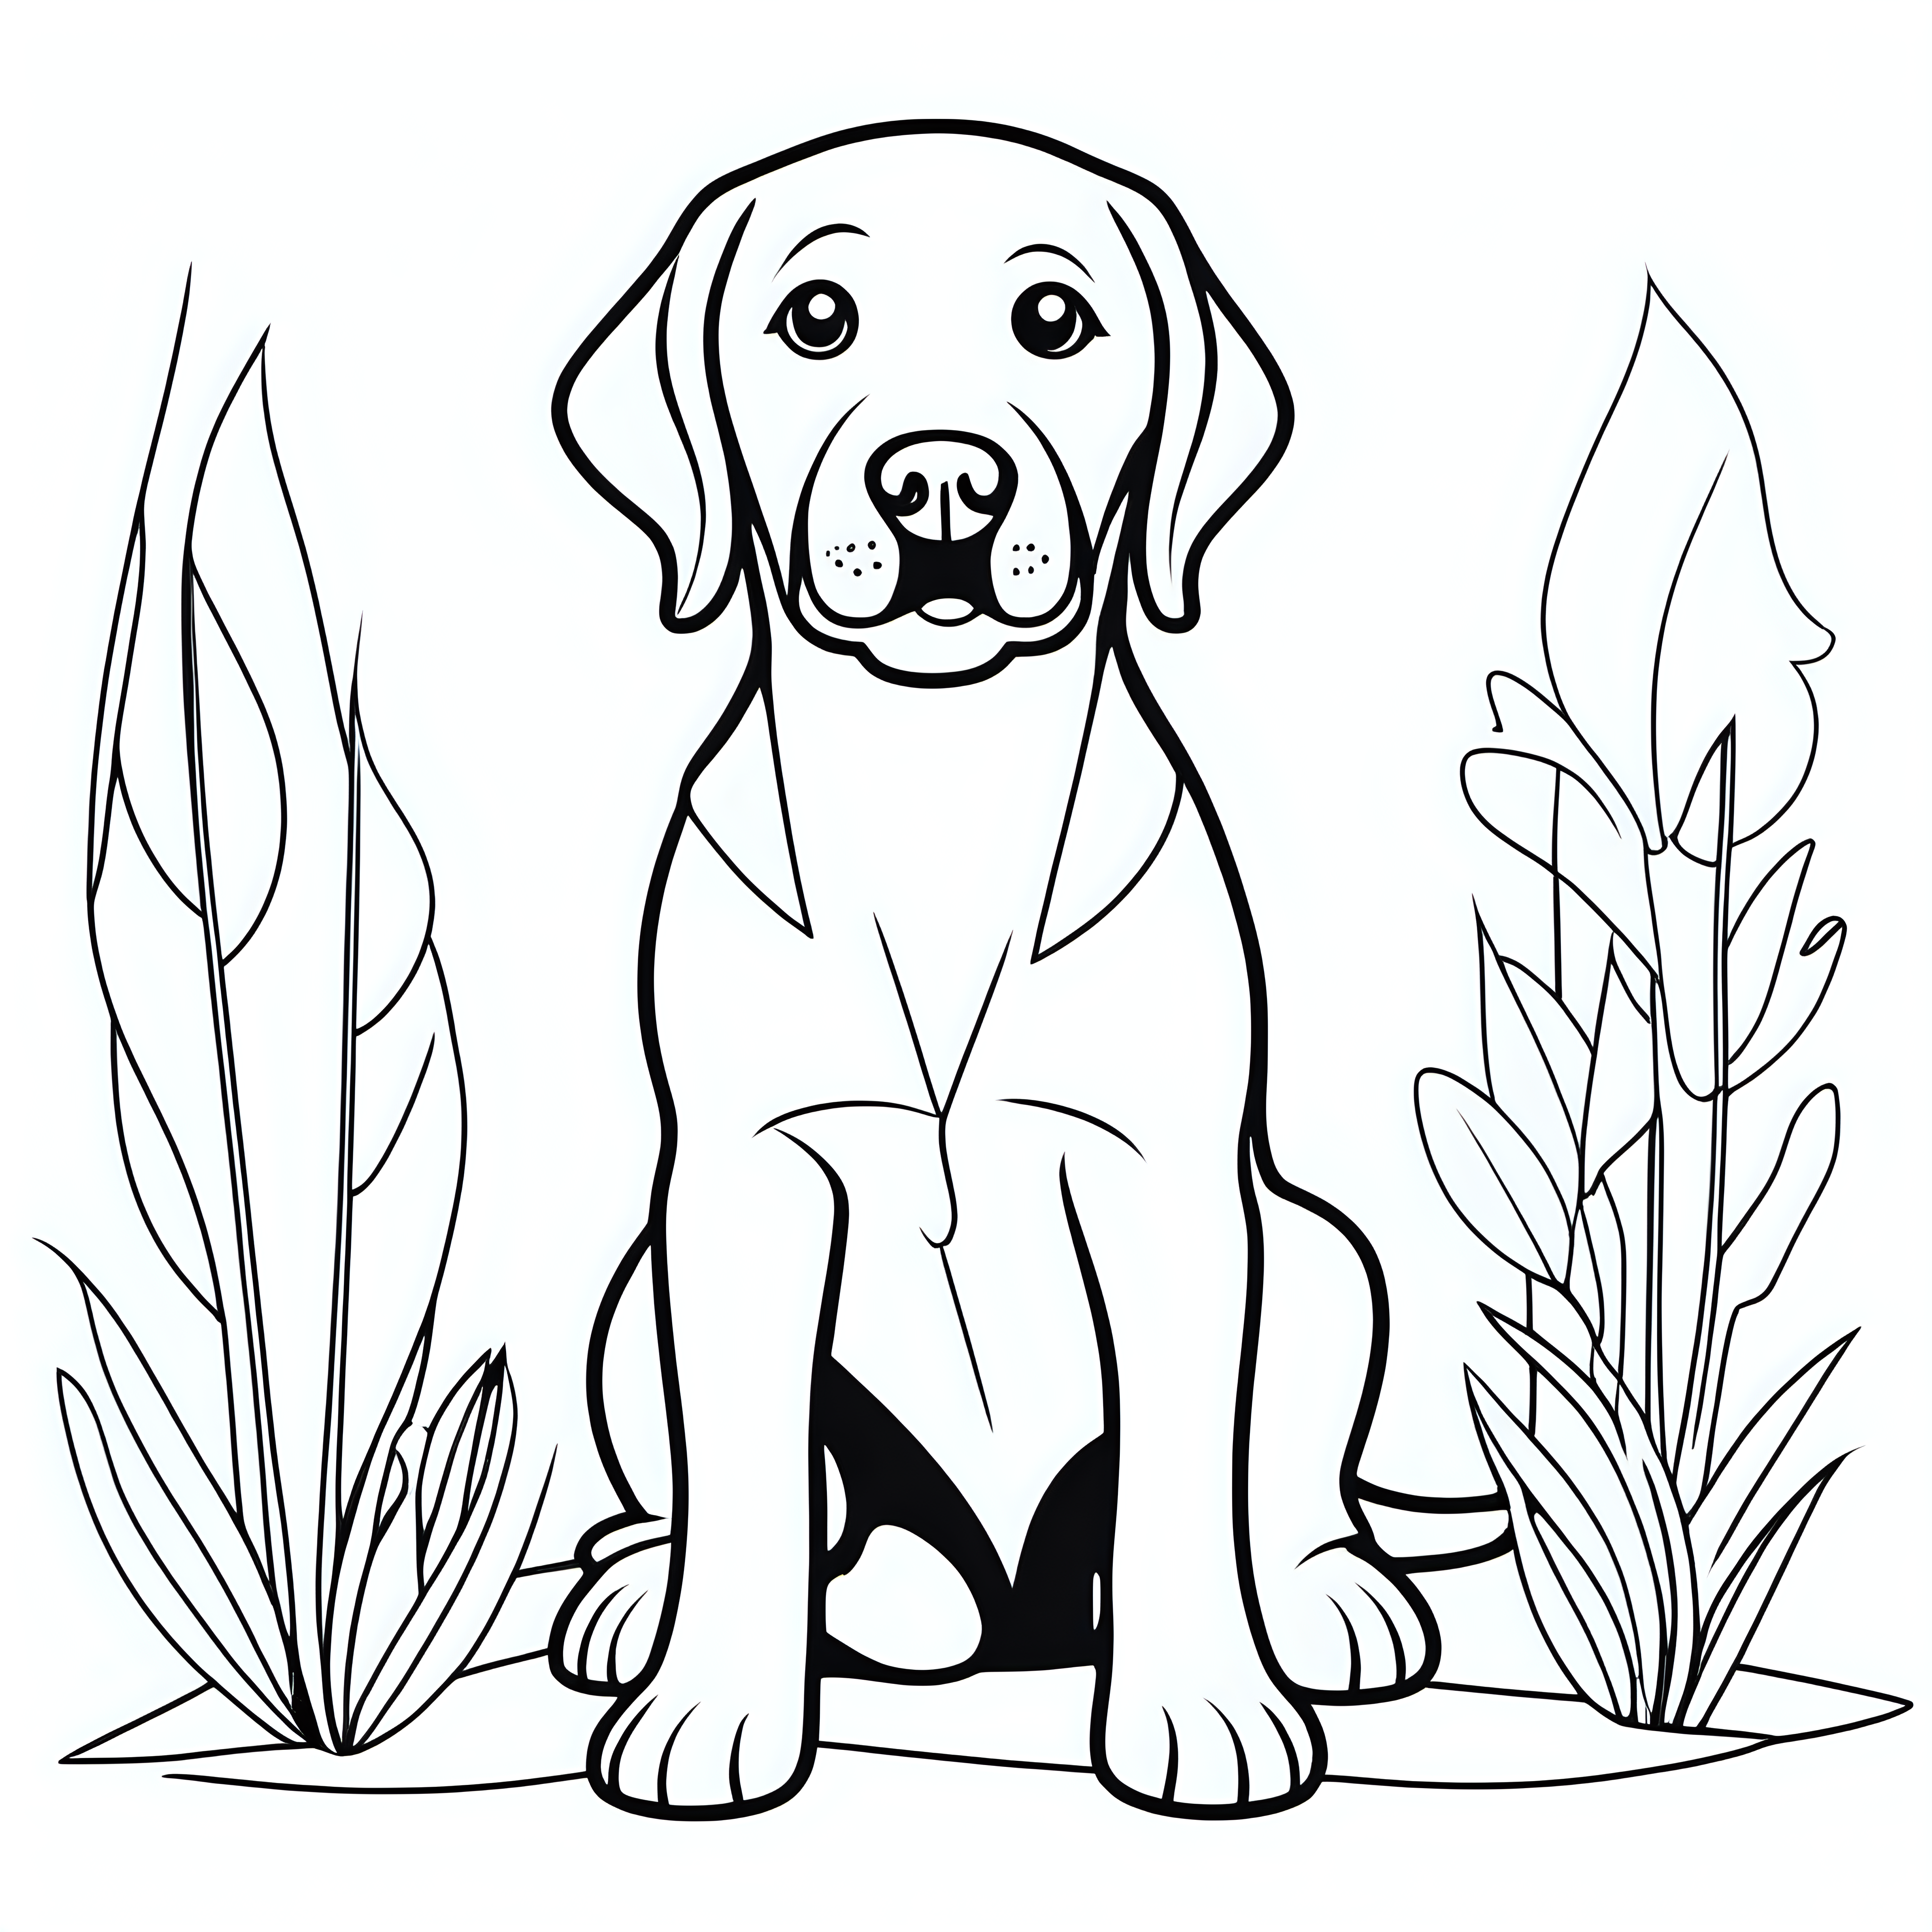 draw a cute labrador dog animal with only the outline in black for a coloring book for kids